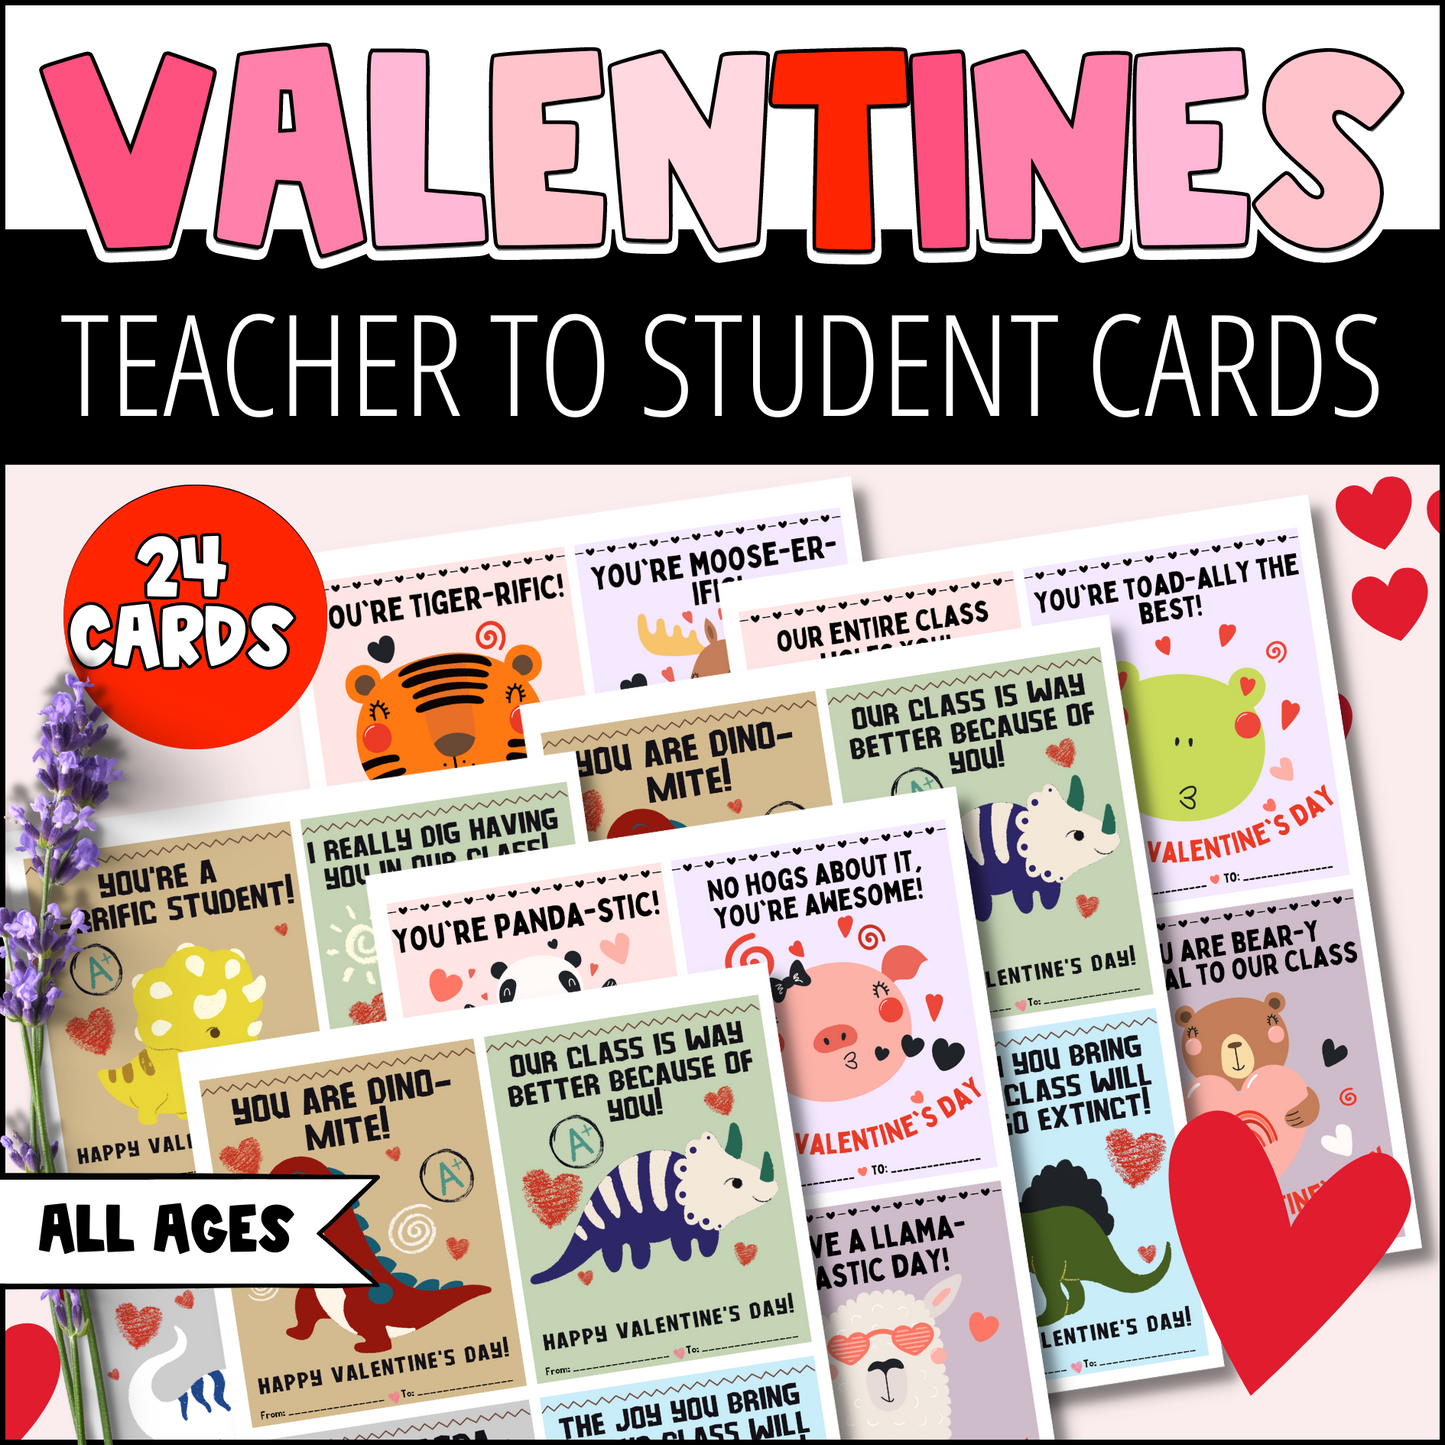 Valentines Day Cards - Teacher to Student